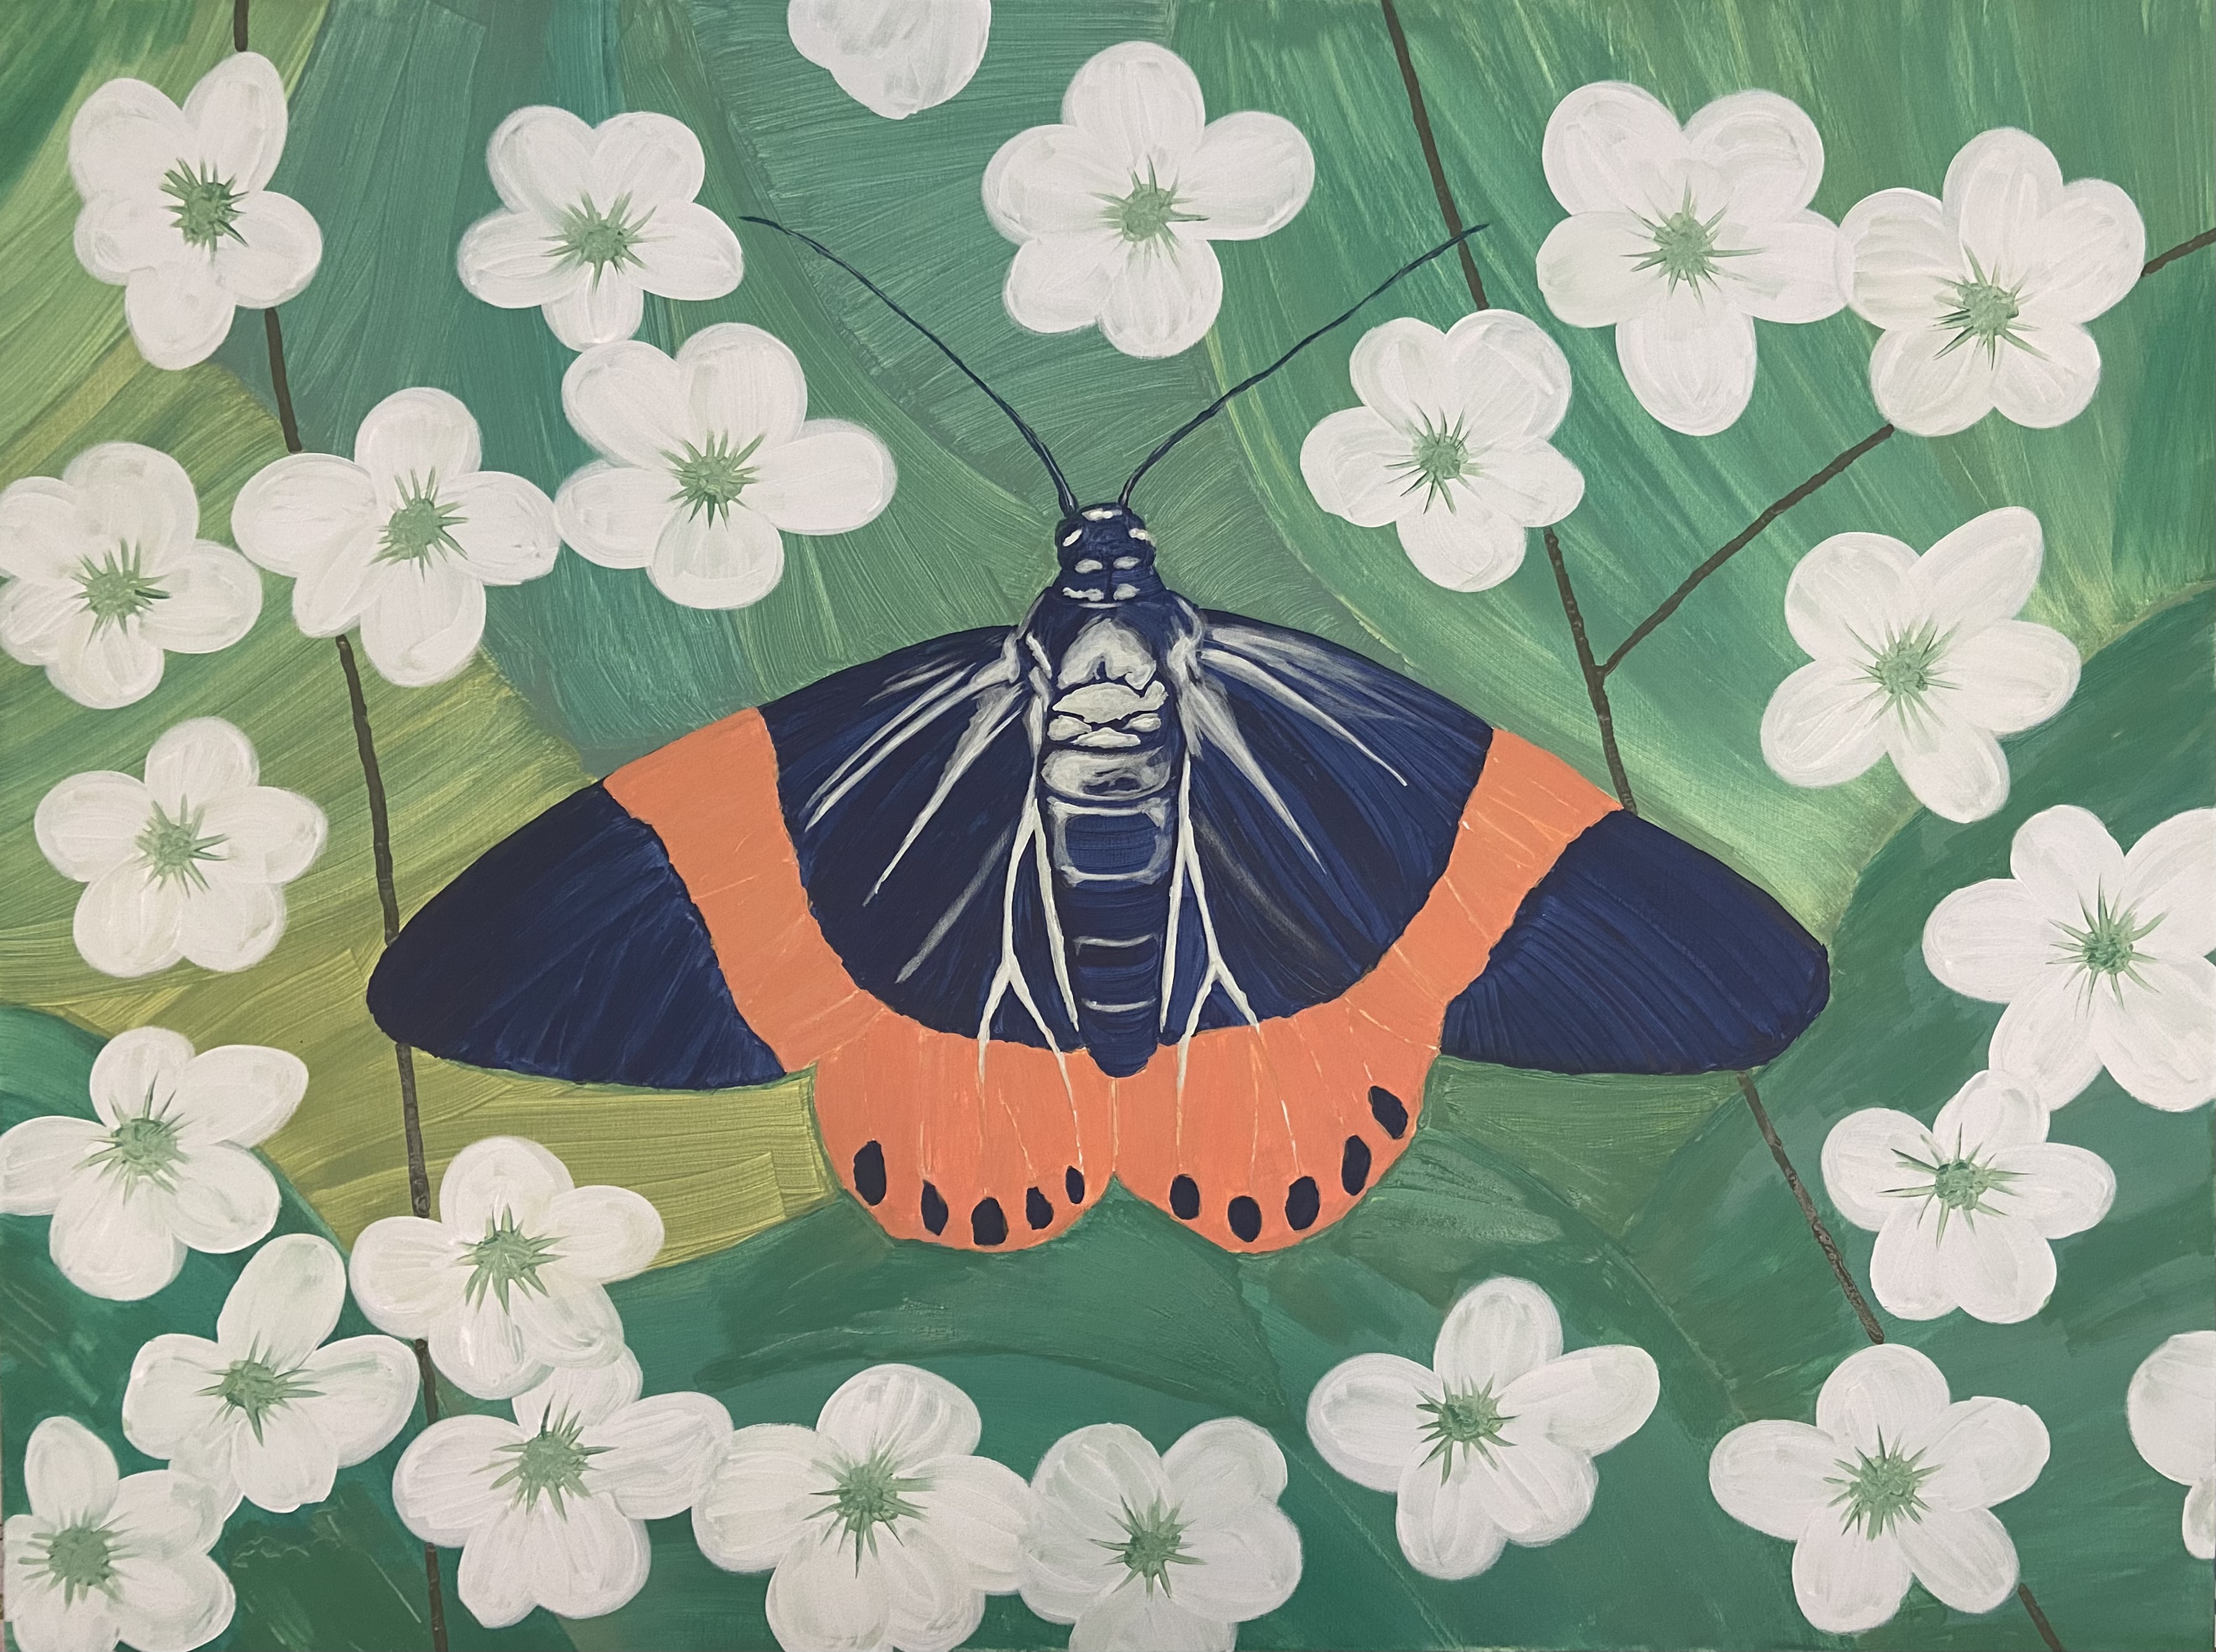 painting of milionia moth with white stripes, orange bars on dark wings, sitting on green leaves and white flowers